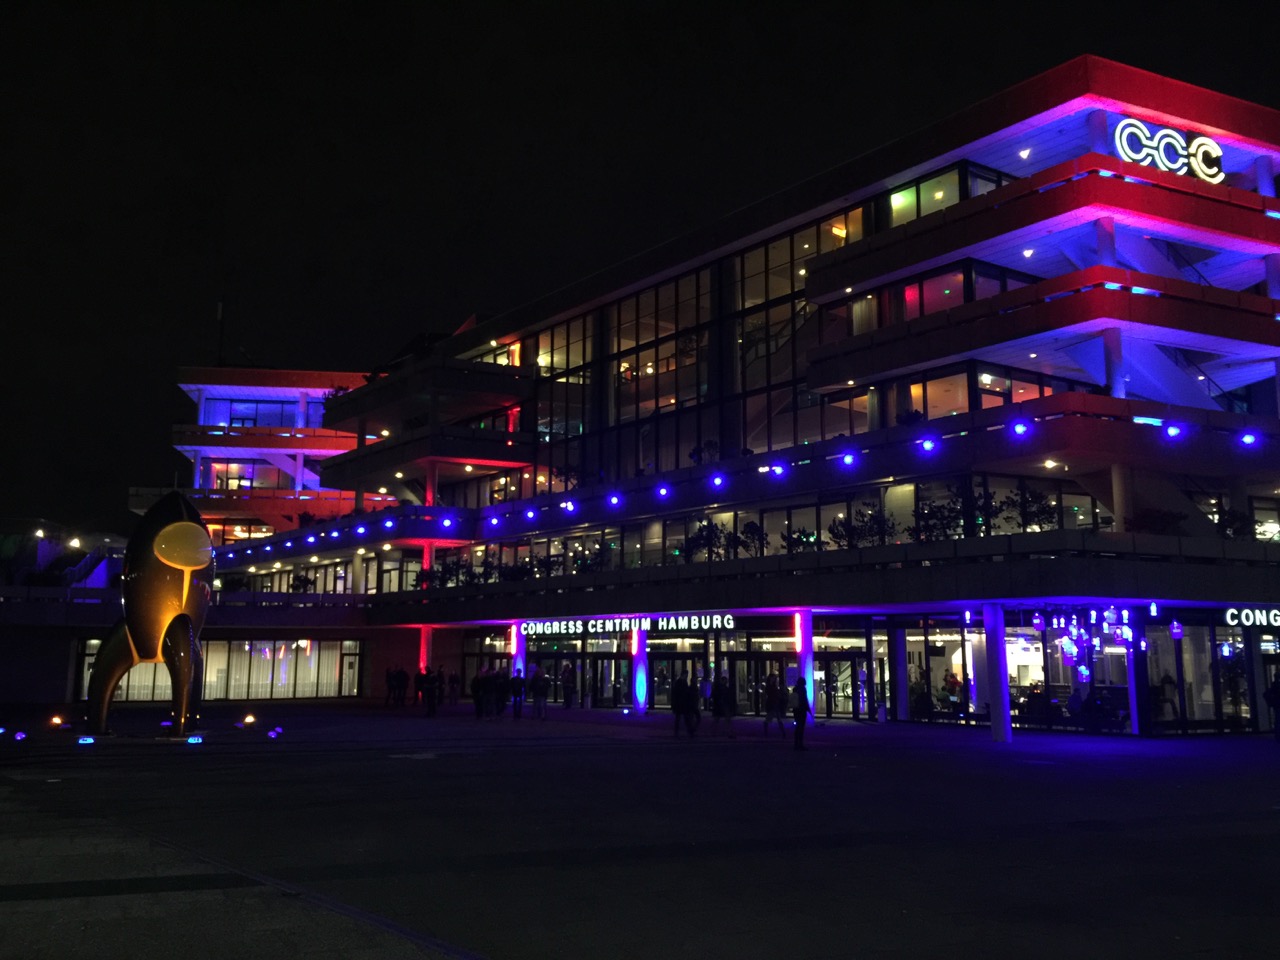 CCH congress center lit up in colorful lights sporting the CCC logo top right